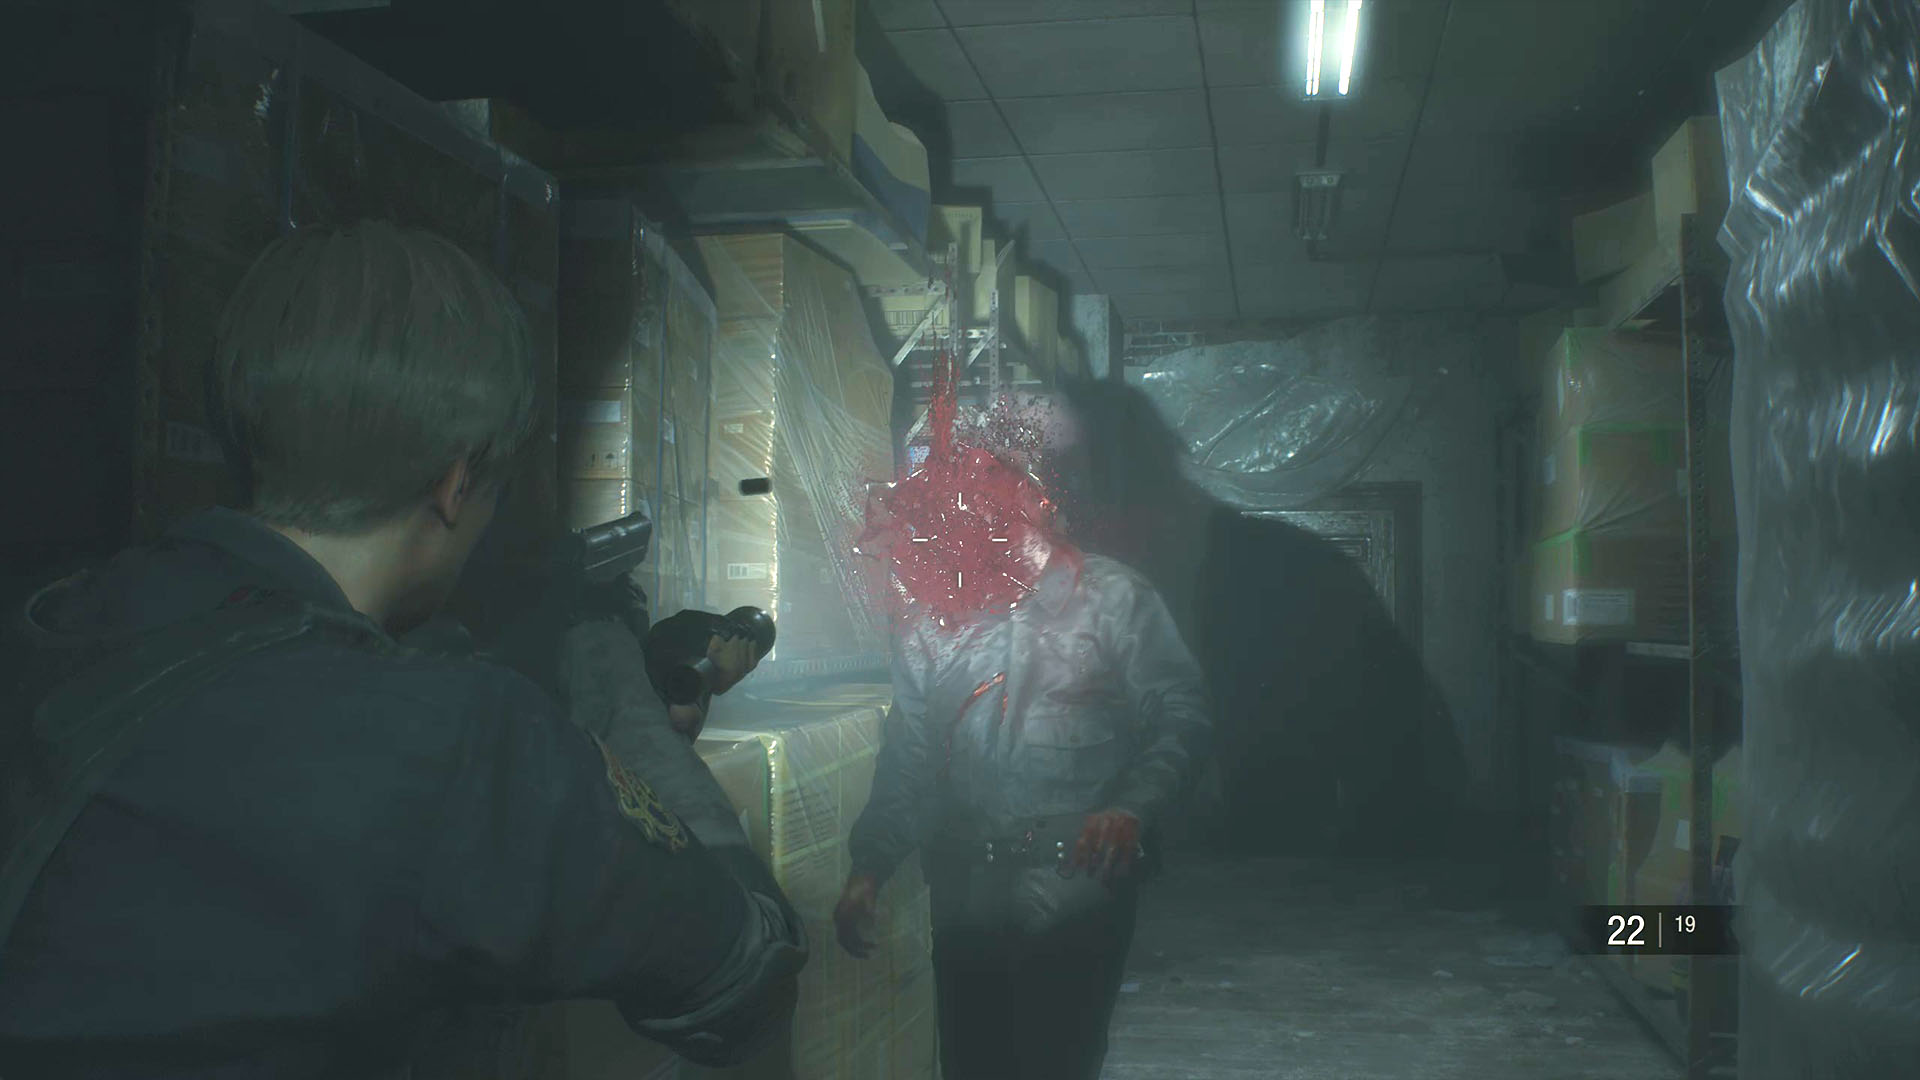 Resident Evil 2 PC review – a bloodbath to relish